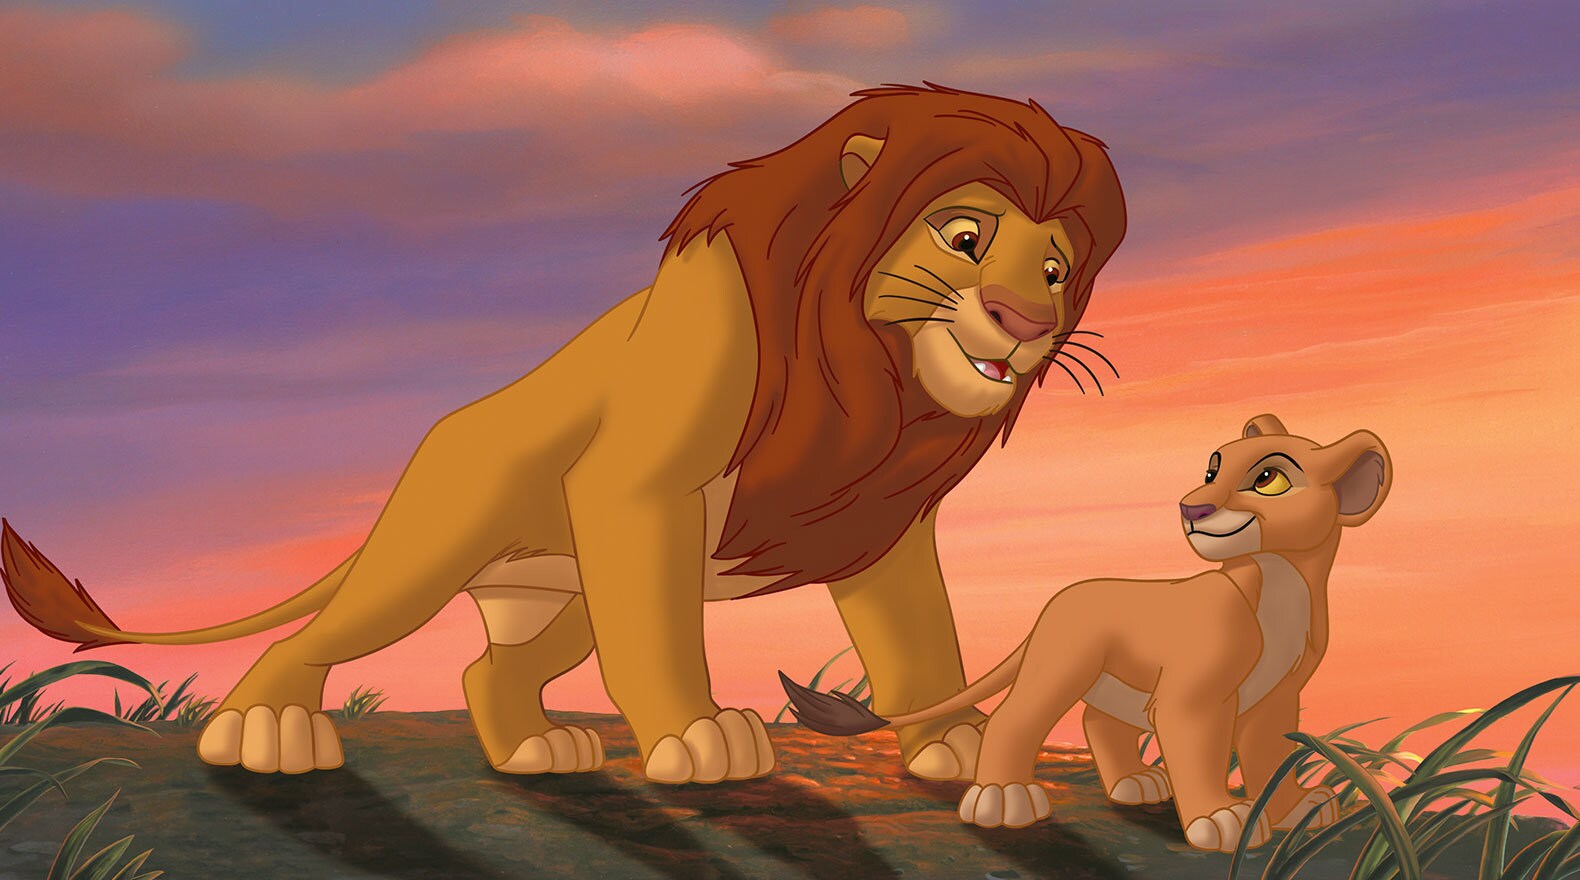 Simba spends time with his daughter, just as his father spent time with him.